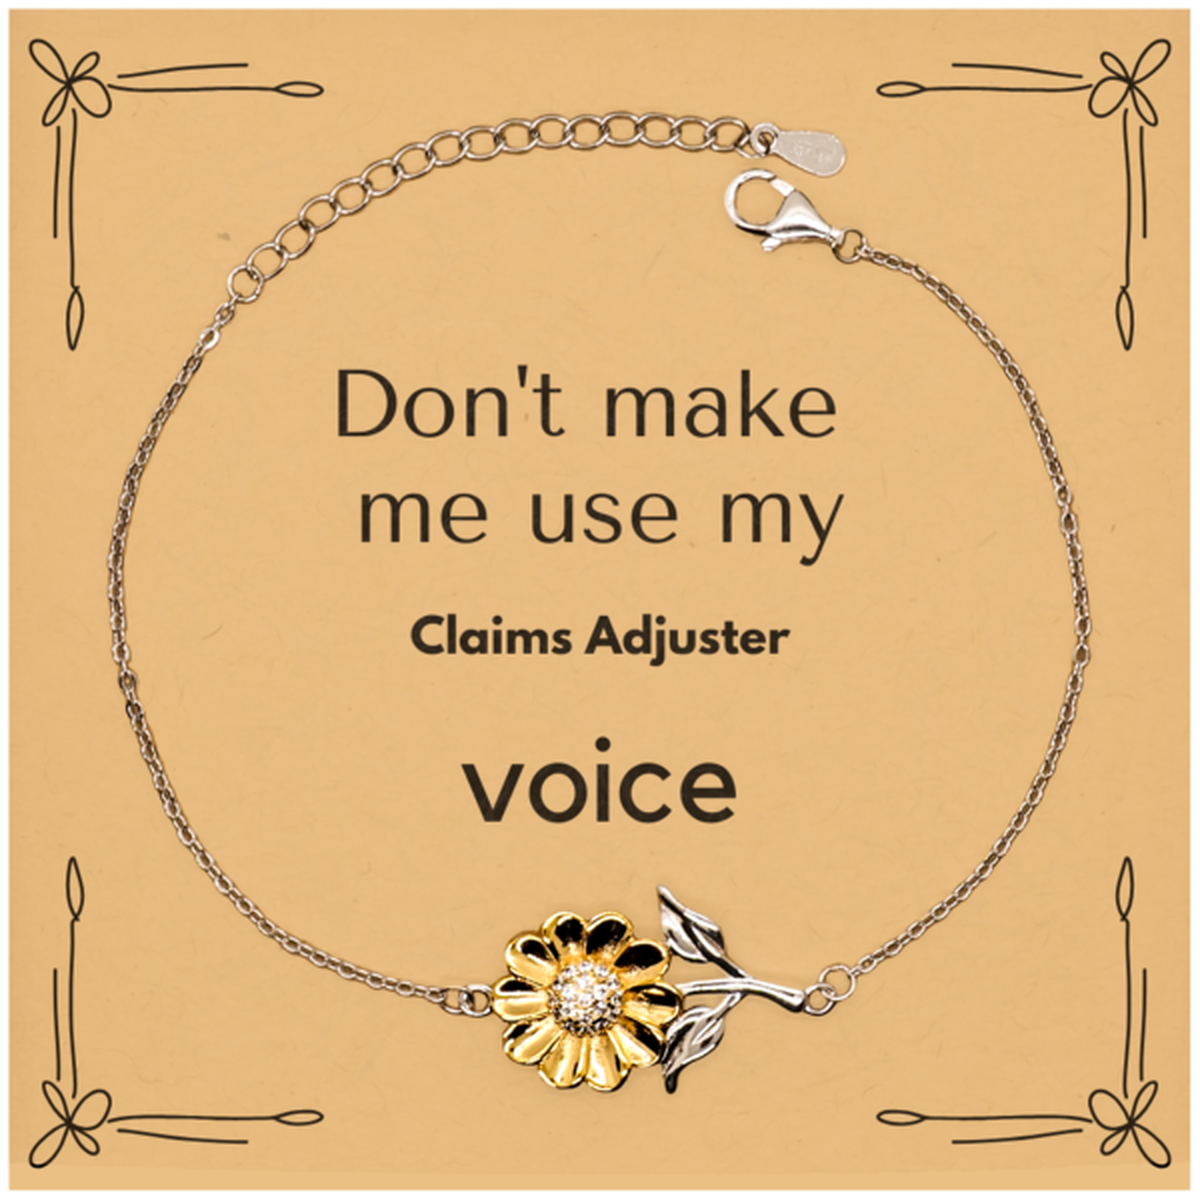 Don't make me use my Claims Adjuster voice, Sarcasm Claims Adjuster Card Gifts, Christmas Claims Adjuster Sunflower Bracelet Birthday Unique Gifts For Claims Adjuster Coworkers, Men, Women, Colleague, Friends